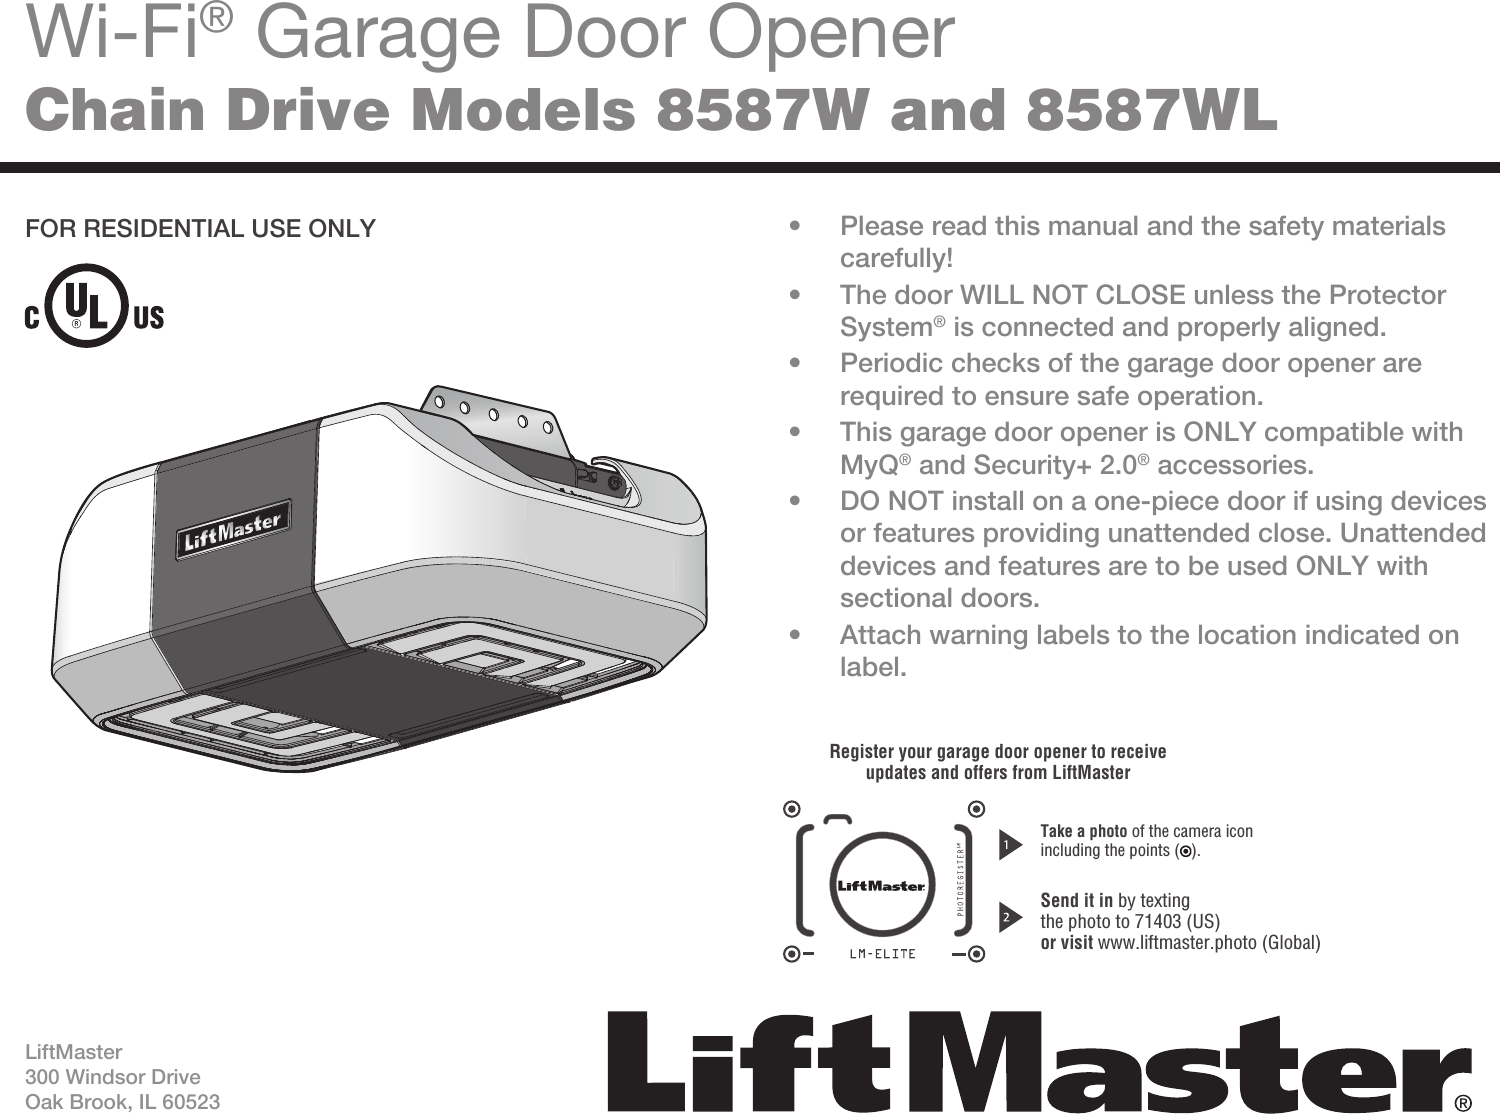 Wi-Fi® Garage Door OpenerChain Drive Models 8587W and 8587WL•  Please read this manual and the safety materials carefully!•  The door WILL NOT CLOSE unless the Protector System® is connected and properly aligned.•  Periodic checks of the garage door opener are required to ensure safe operation.•  This garage door opener is ONLY compatible with MyQ® and Security+ 2.0® accessories.•  DO NOT install on a one-piece door if using devices or features providing unattended close. Unattended devices and features are to be used ONLY with sectional doors.•  Attach warning labels to the location indicated on label.FOR RESIDENTIAL USE ONLYLiftMaster300 Windsor DriveOak Brook, IL 60523Register your garage door opener to receiveupdates and offers from LiftMasterSend it in by textingthe photo to 71403 (US)or visit www.liftmaster.photo (Global)Take a photo of the camera iconincluding the points ( ).